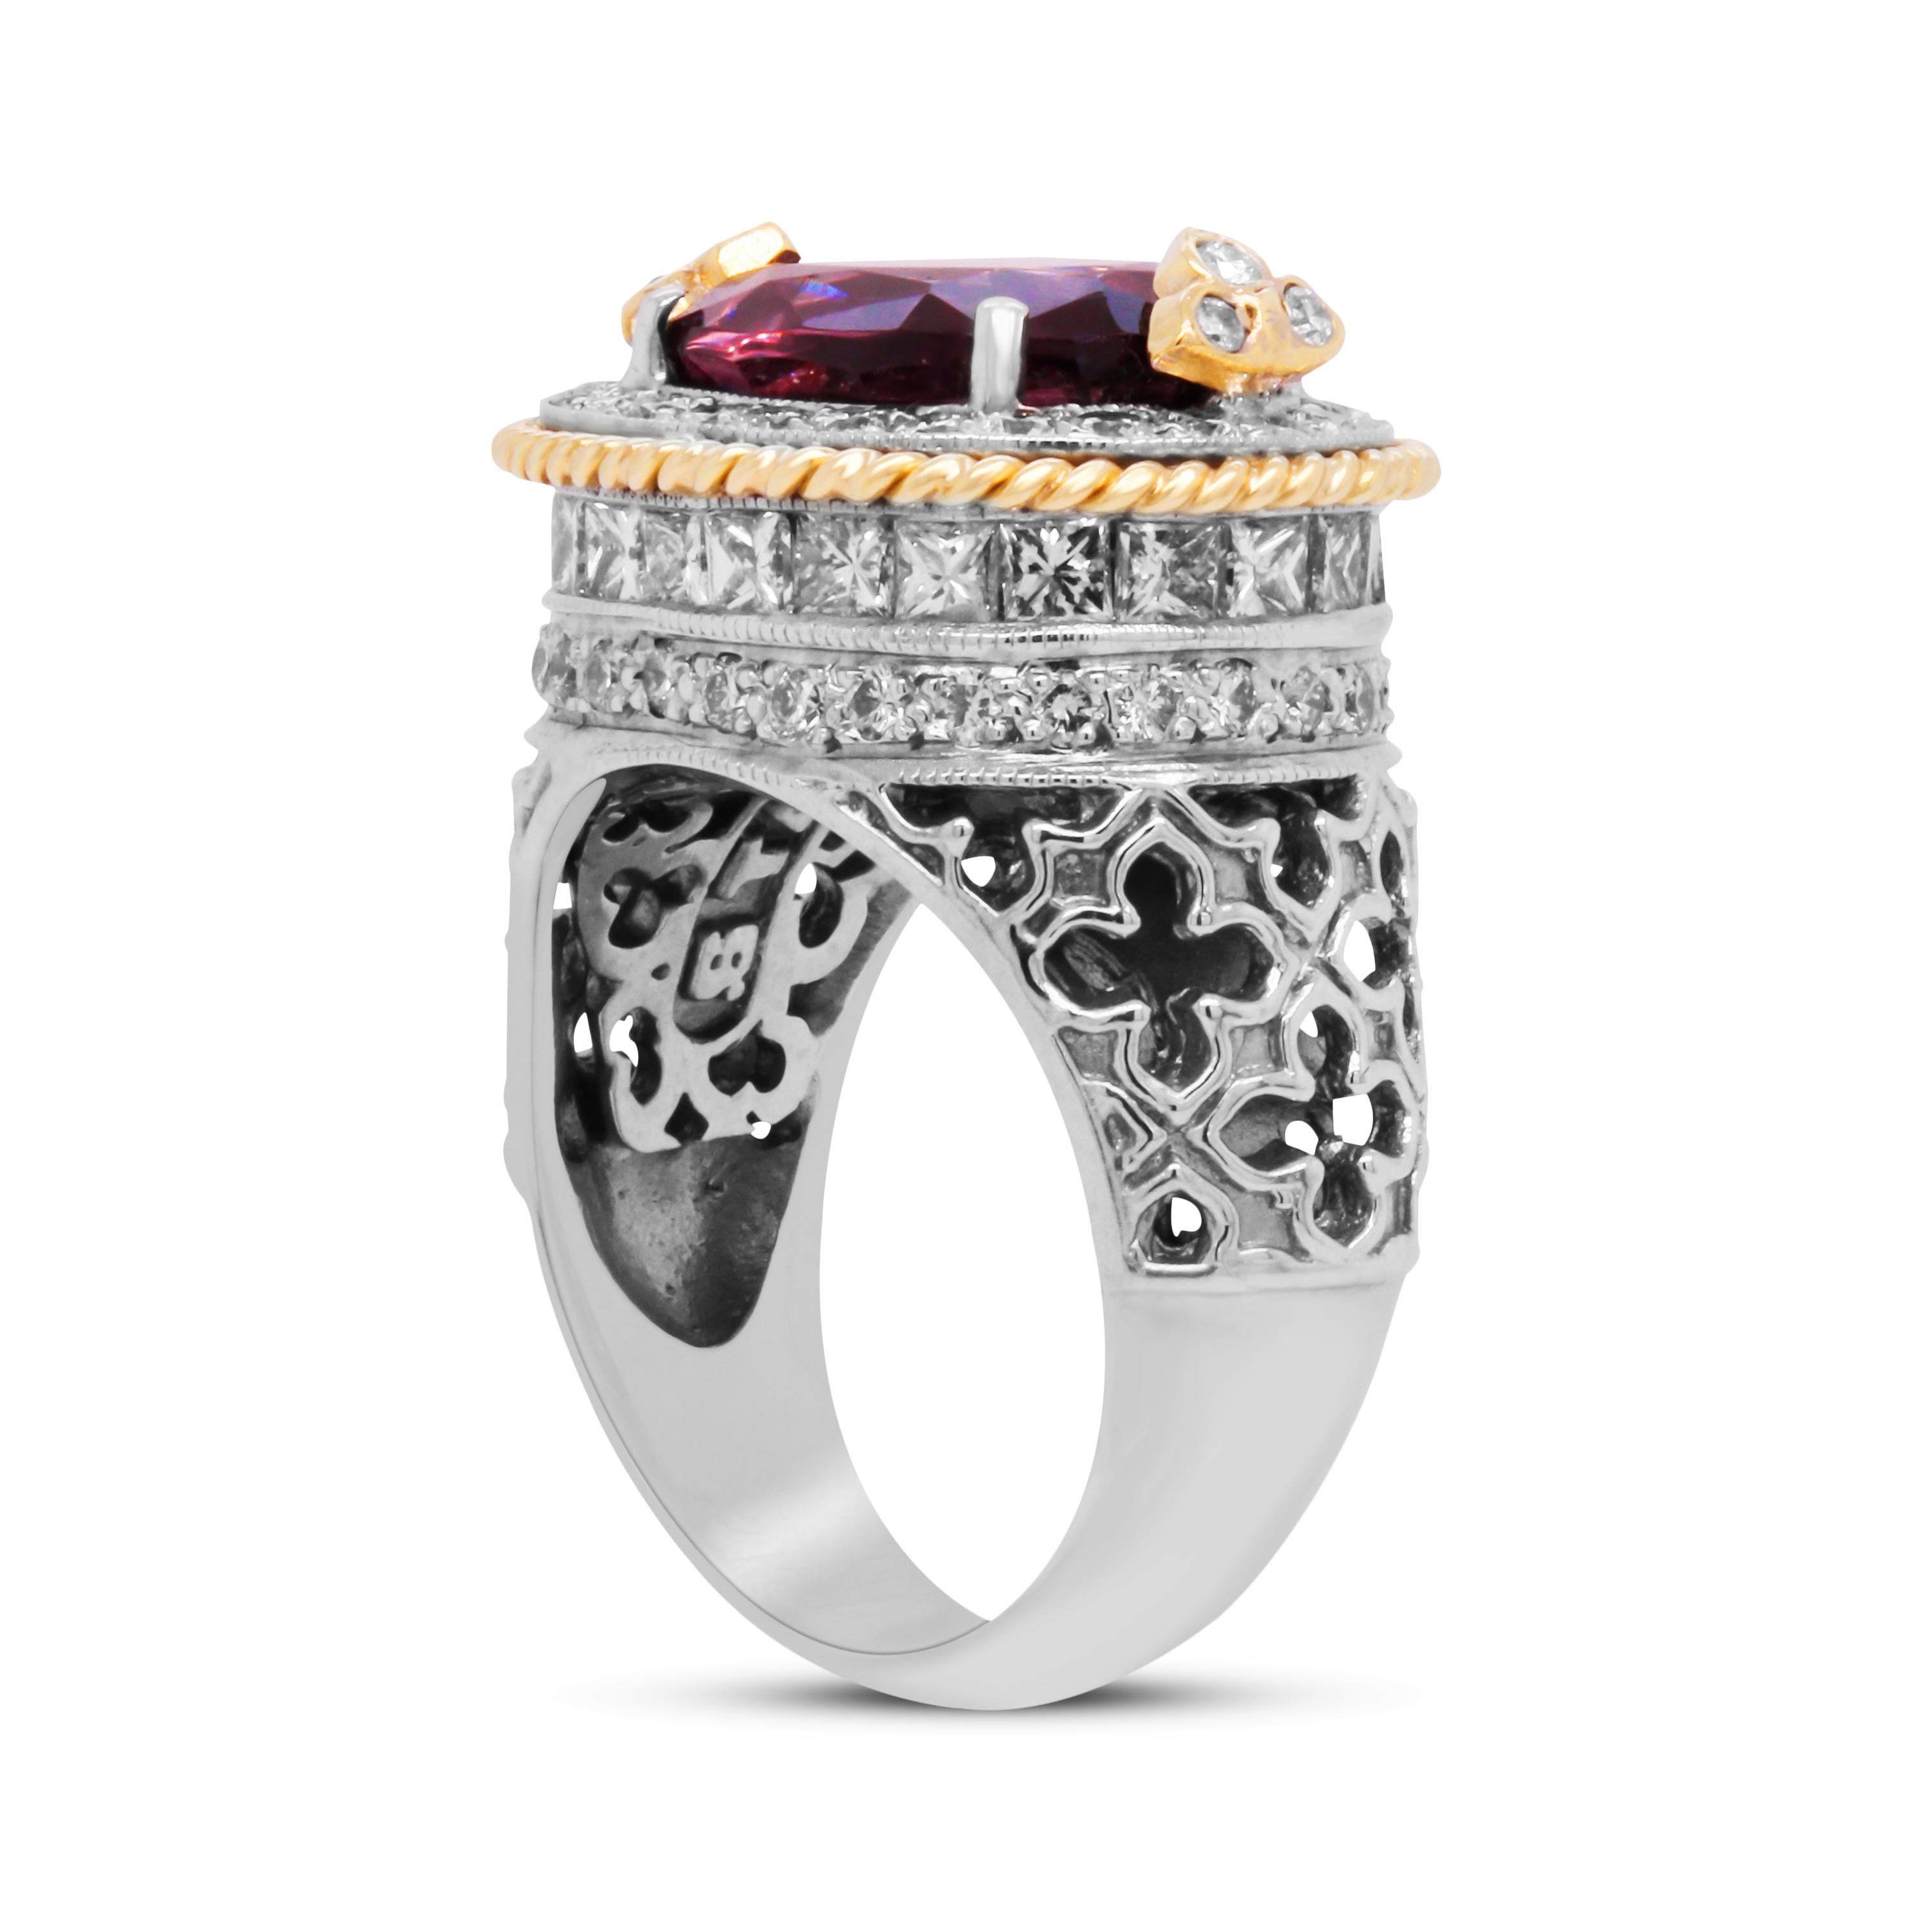 Stambolian 18K Yellow White Gold Round Princes Cut Diamonds Purple Spinel Ring

A one-of-a-kind ring by Stambolian, this ring features an original architecture-inspired design with princess and round diamonds along with an oval-cut, Purple Spinel